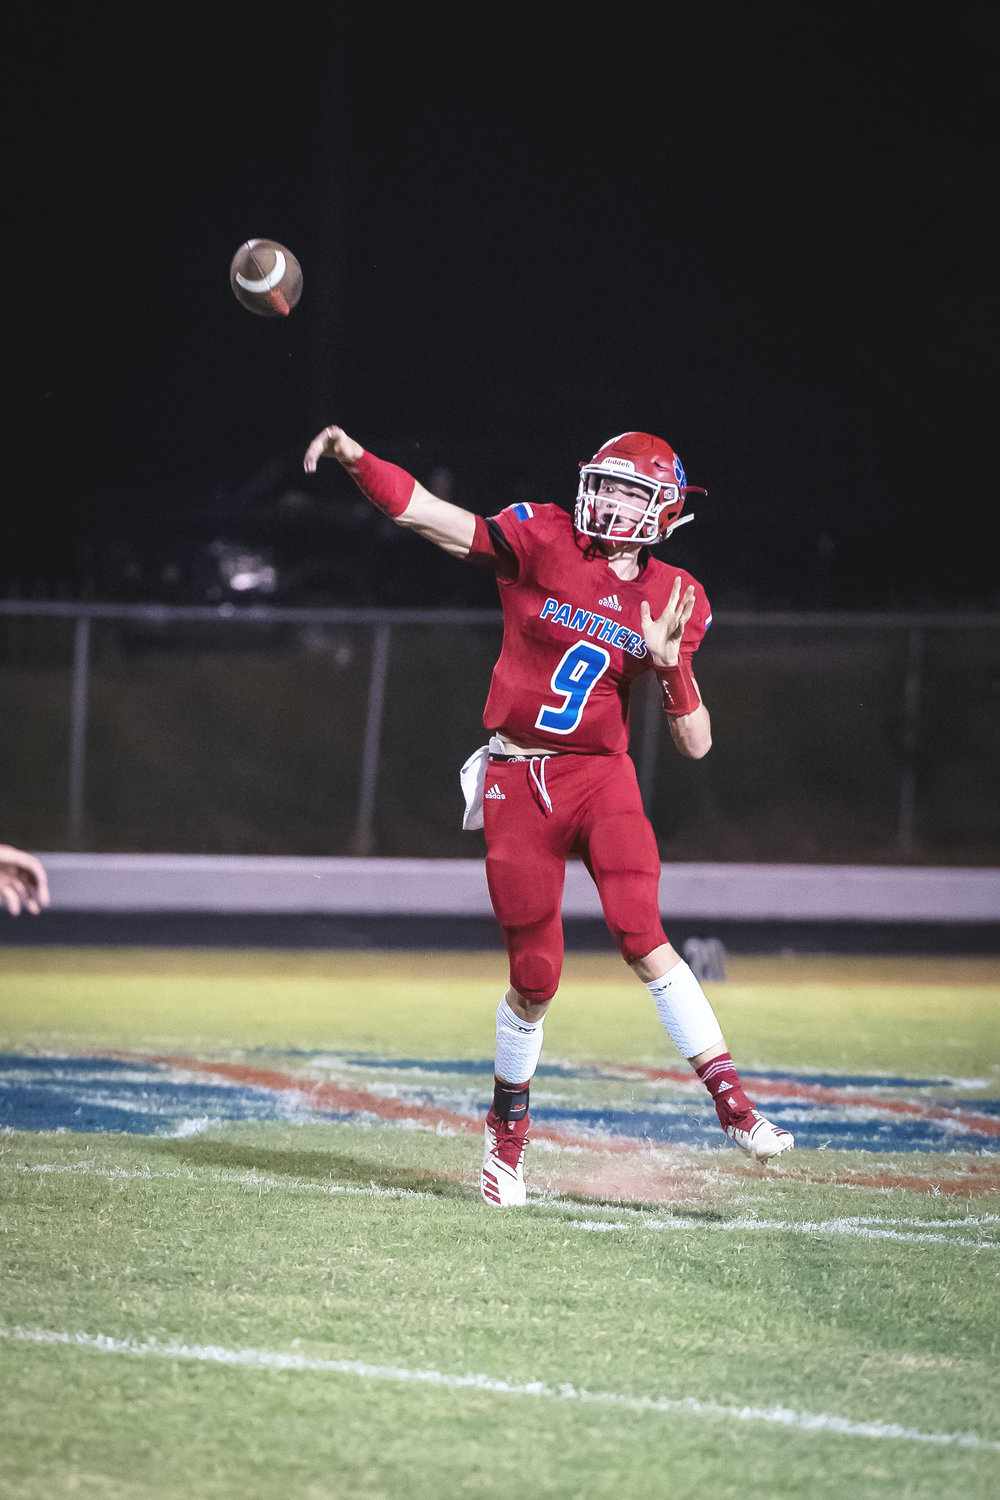 Zane Smith earned First Team Quarterback honors.